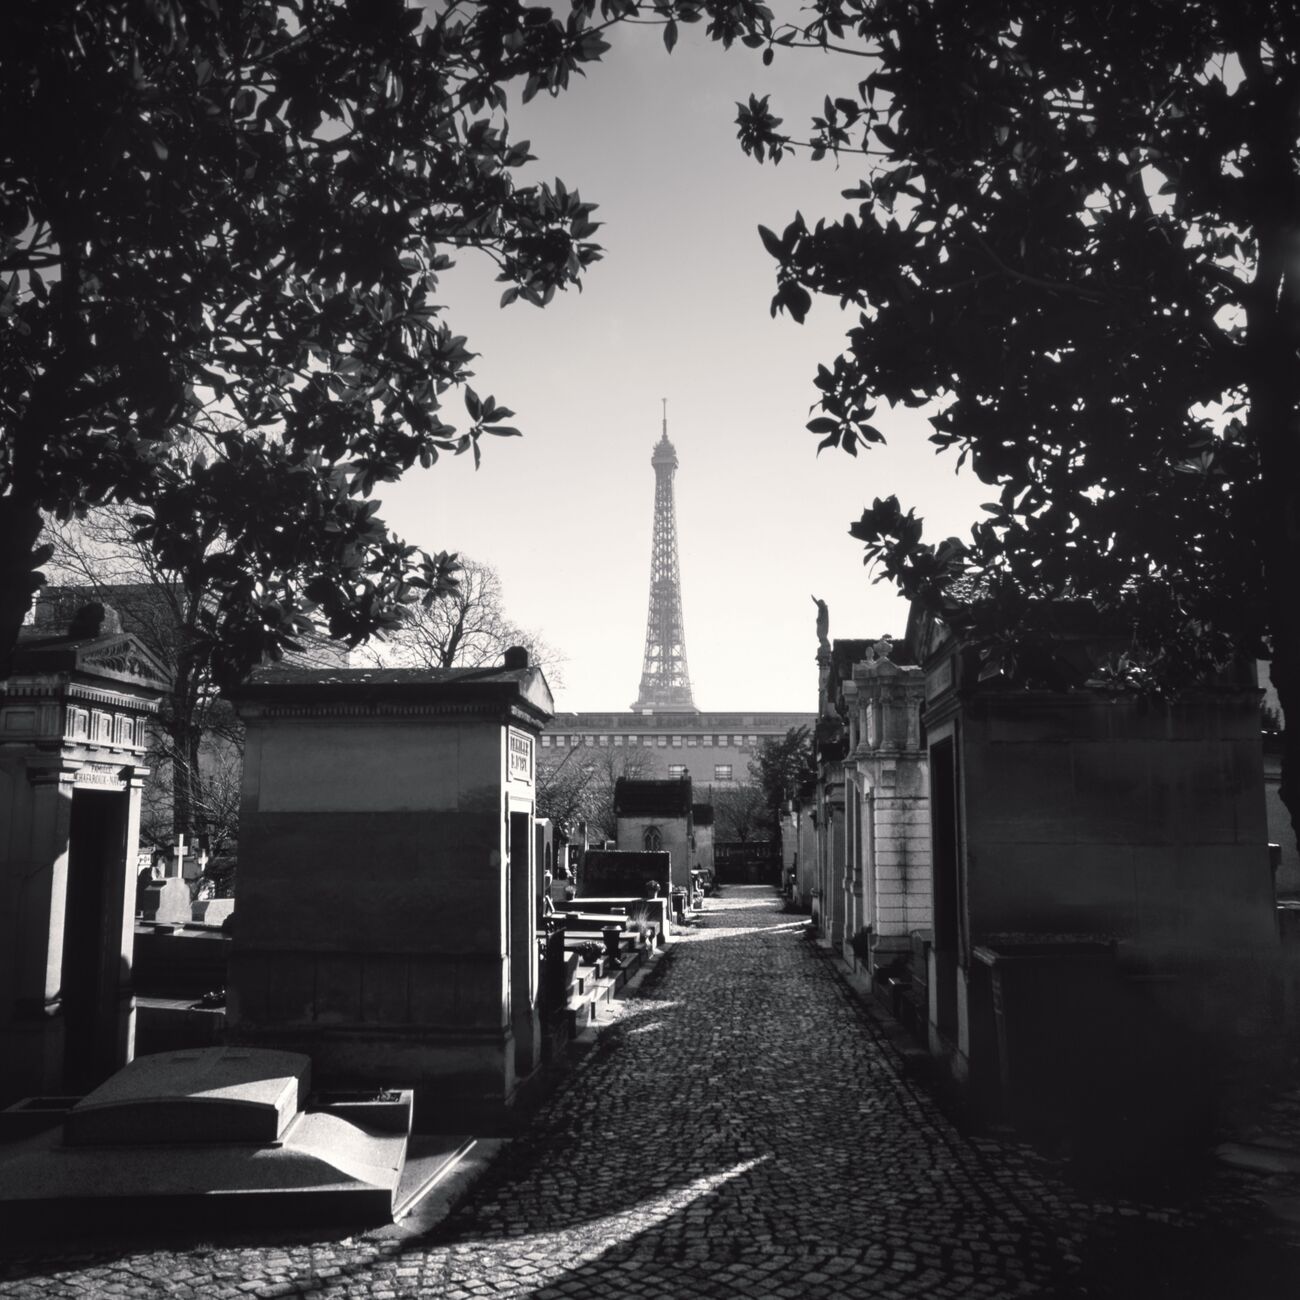 Eiffel Tower, Passy Cemetery, Paris, France. February 2022. Ref-11537 - Denis Olivier Photography